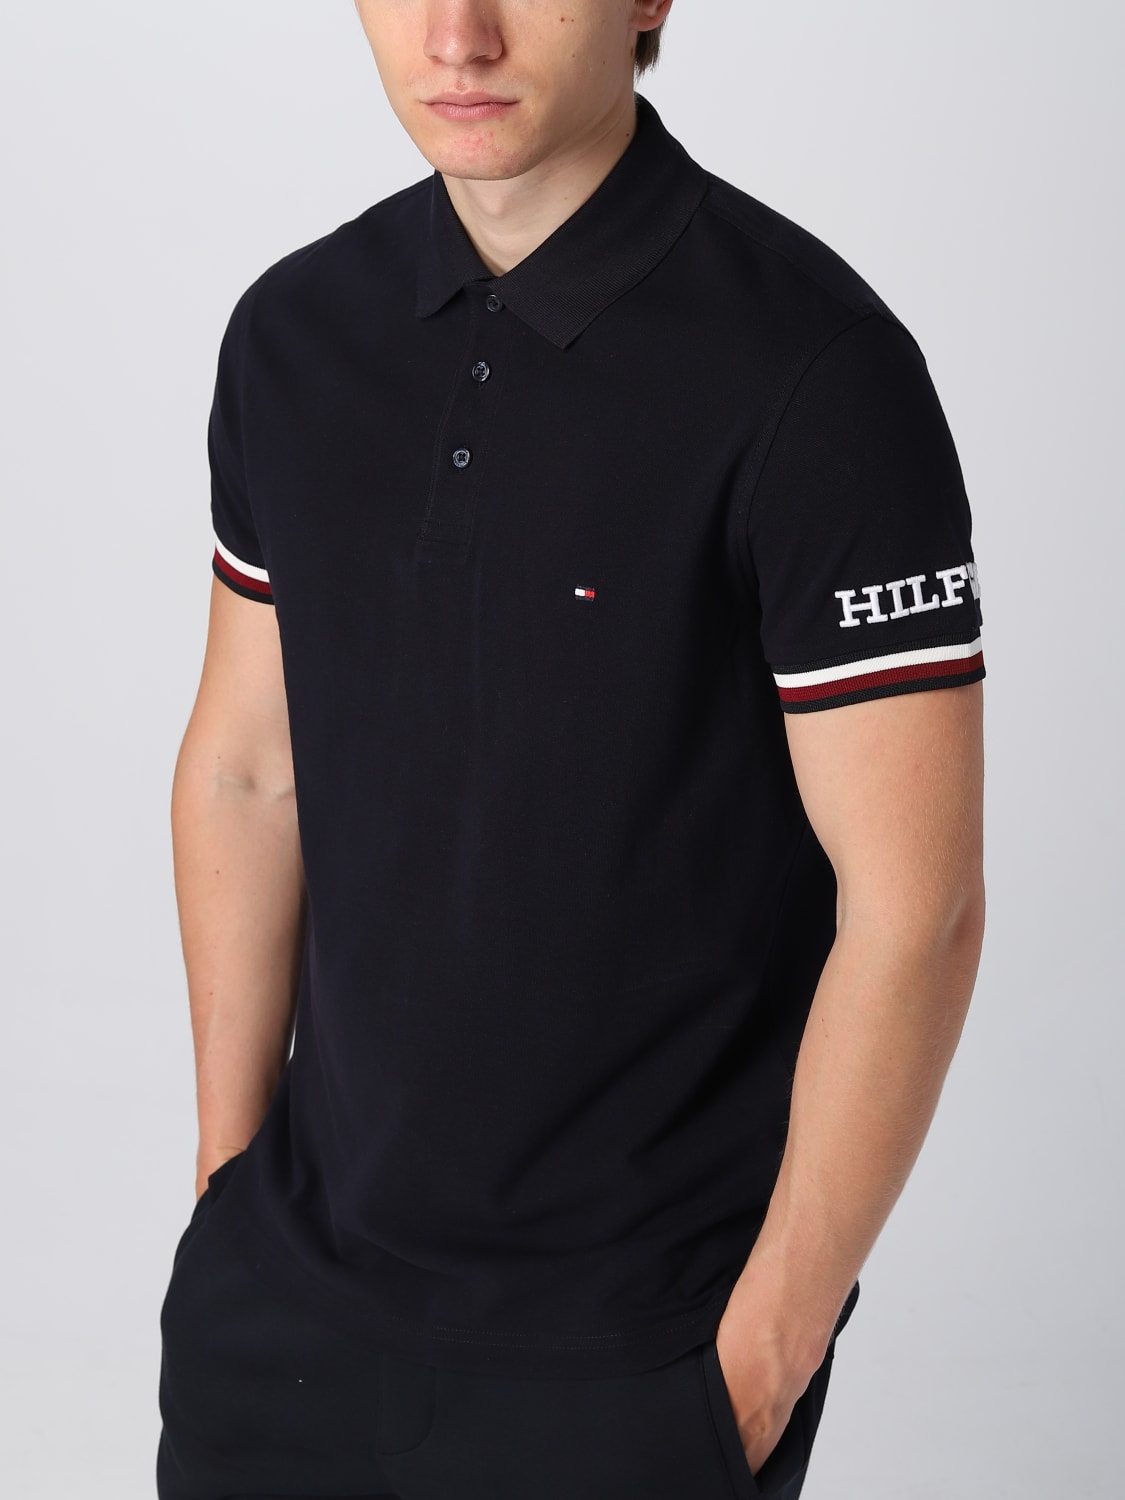 TOMMY HILFIGER: polo shirt for man - Blue | Tommy Hilfiger polo shirt ...